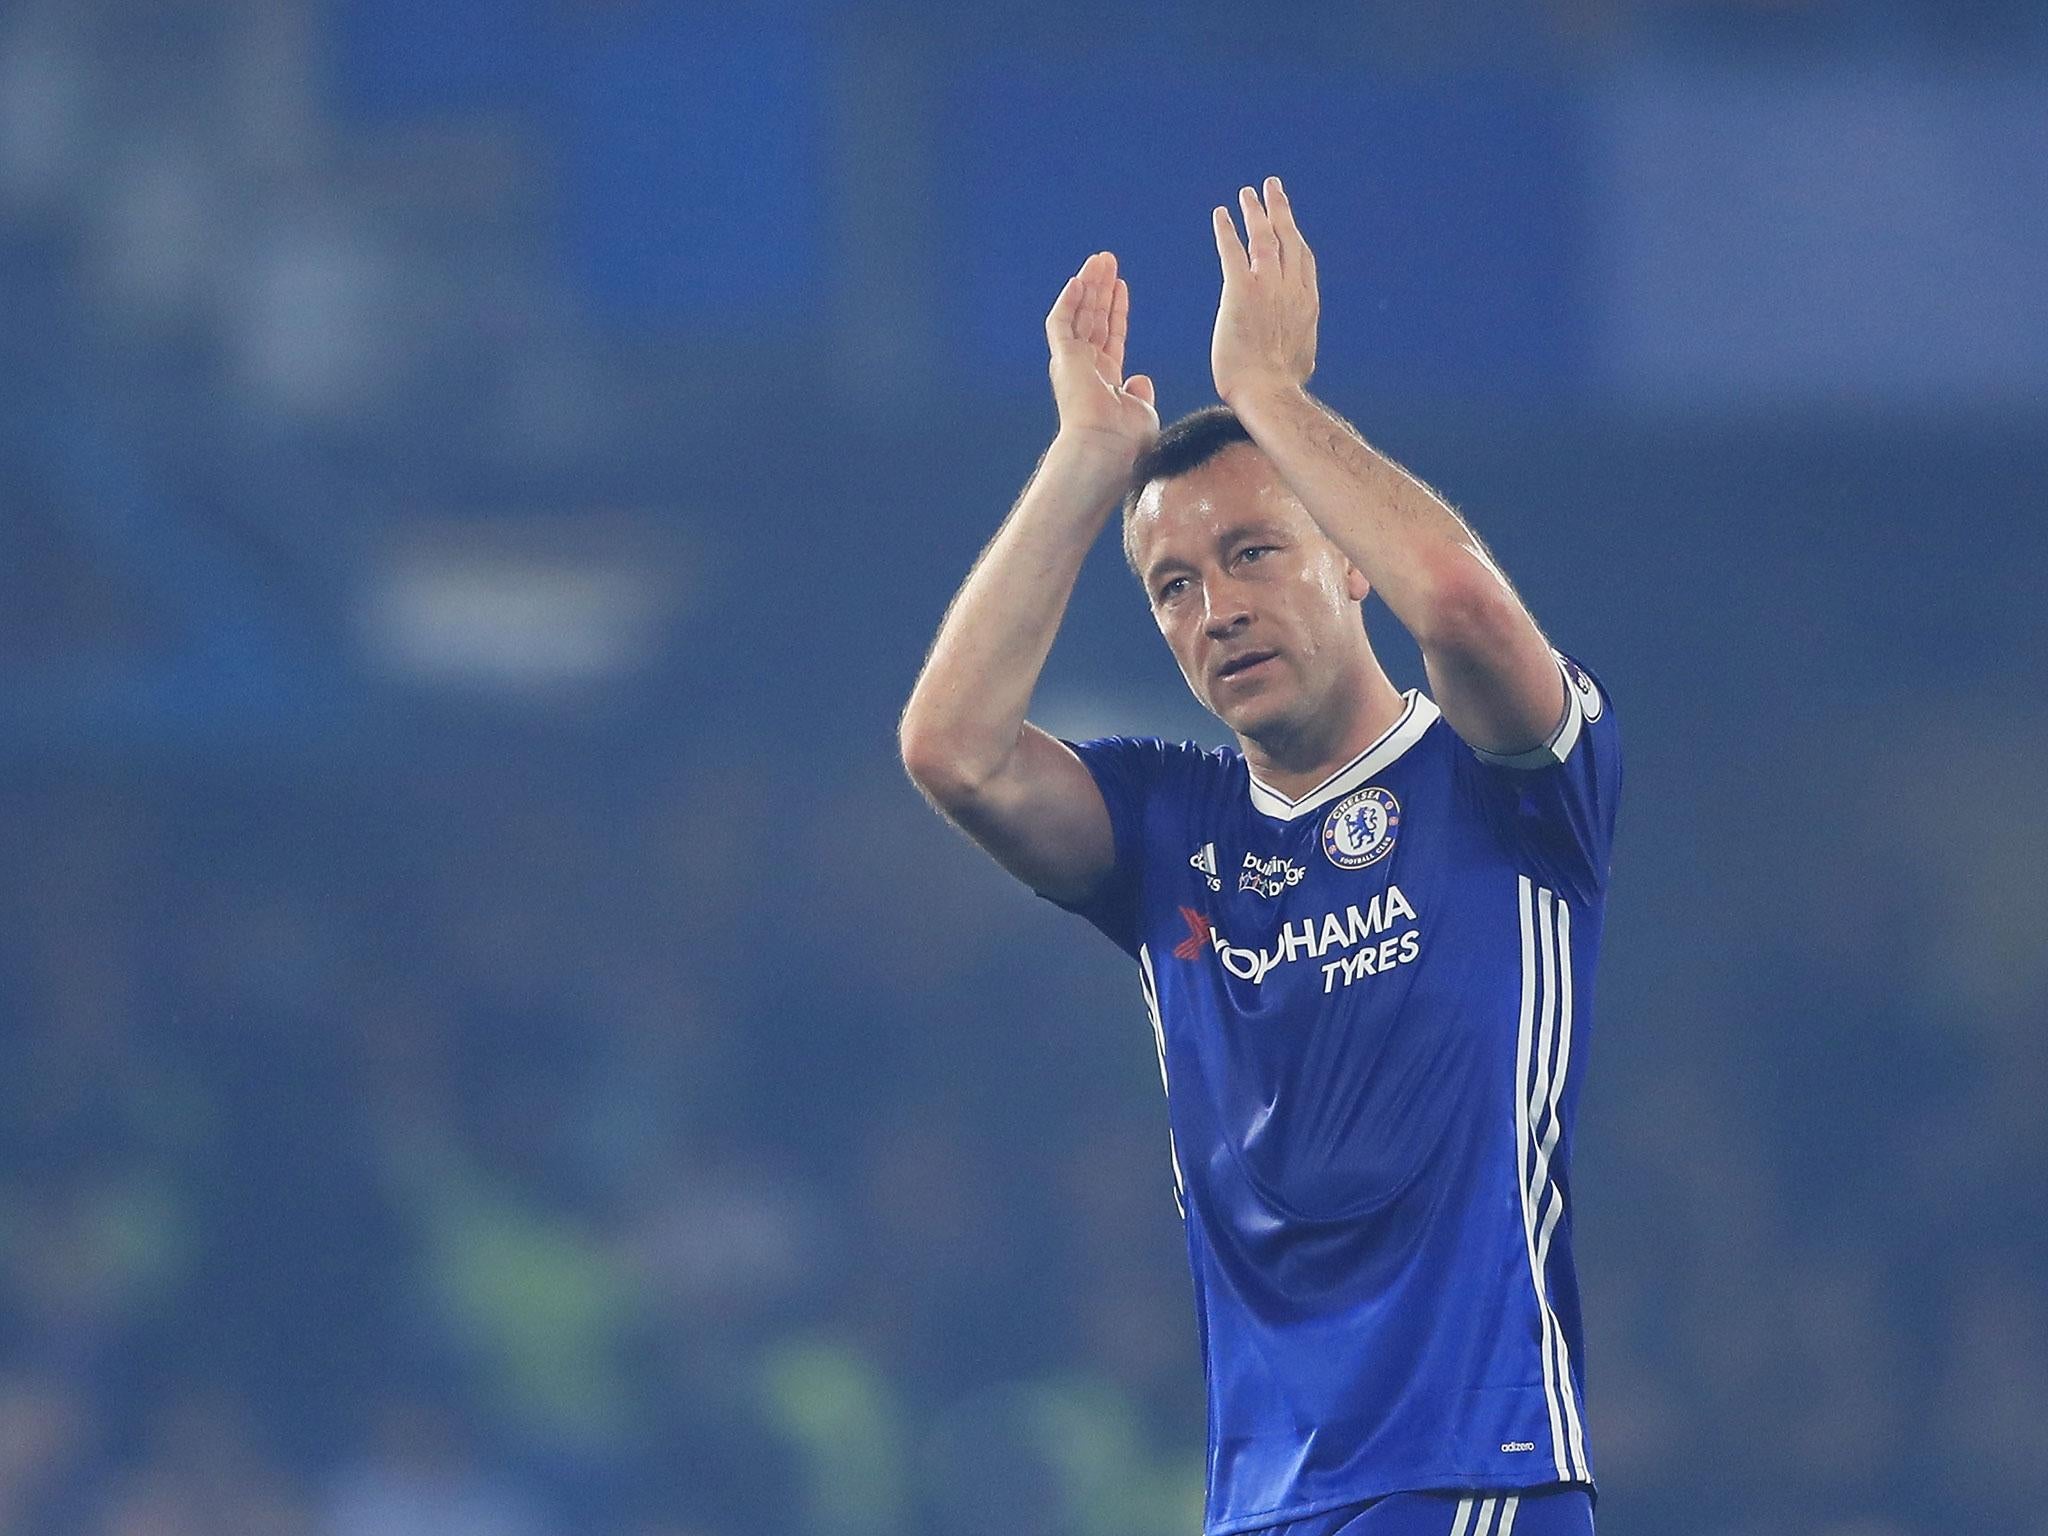 John Terry could retire when his Chelsea career comes to an end in two games time